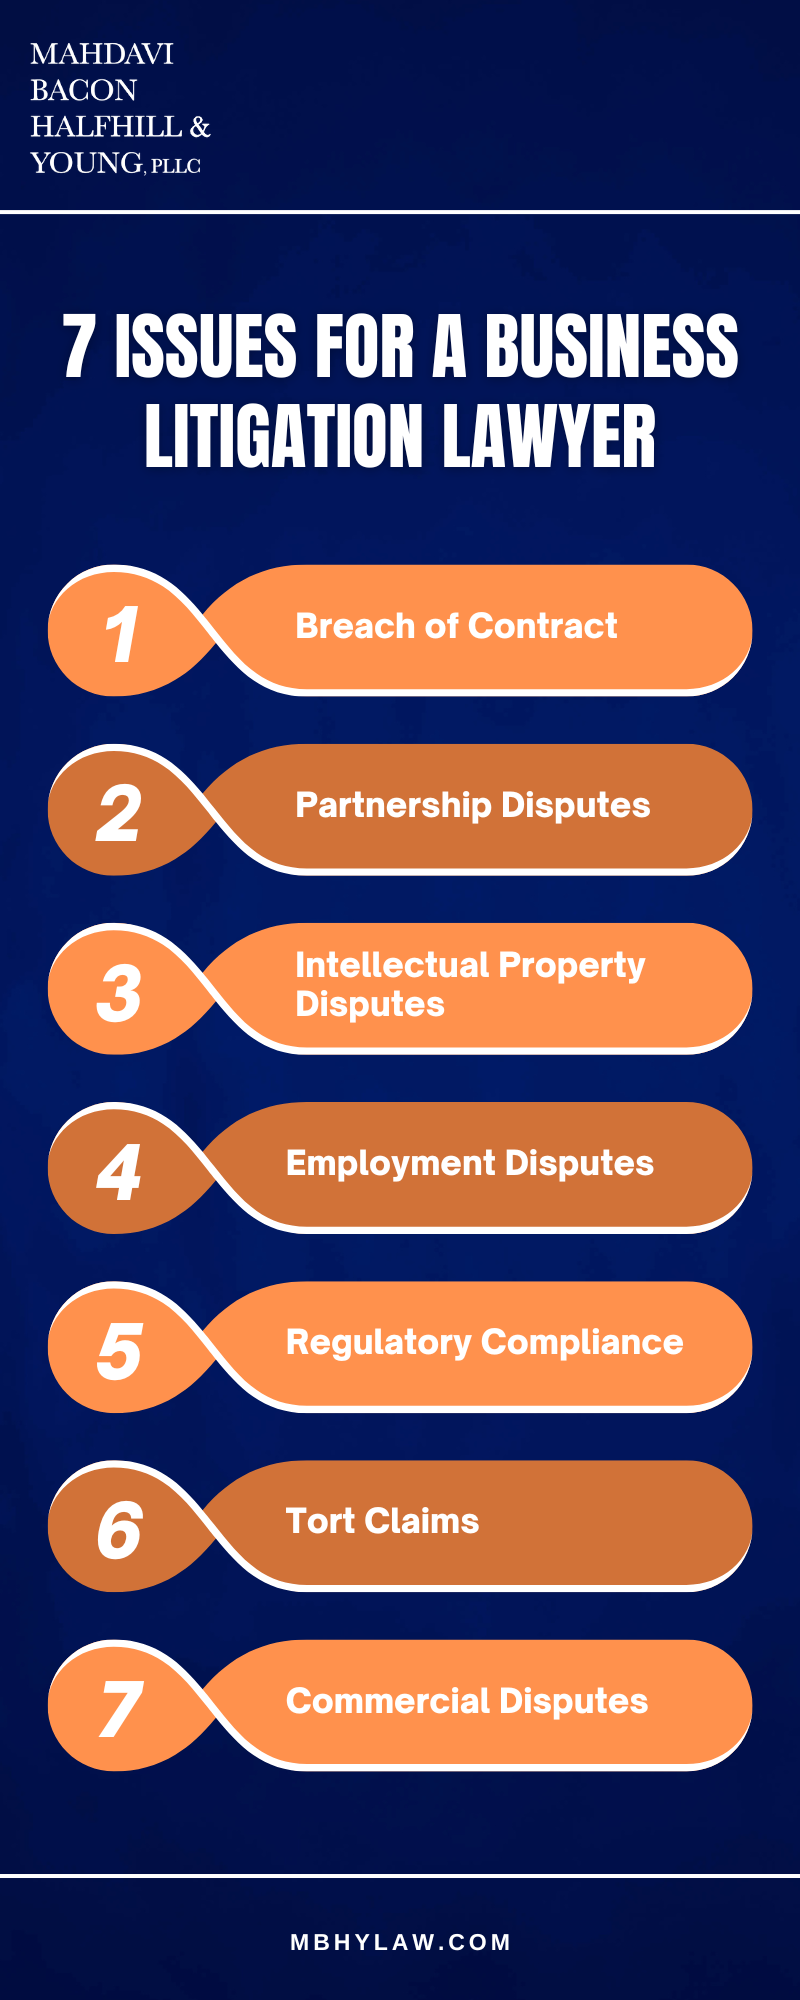 7 Issues For A Business Litigation Lawyer Infographic